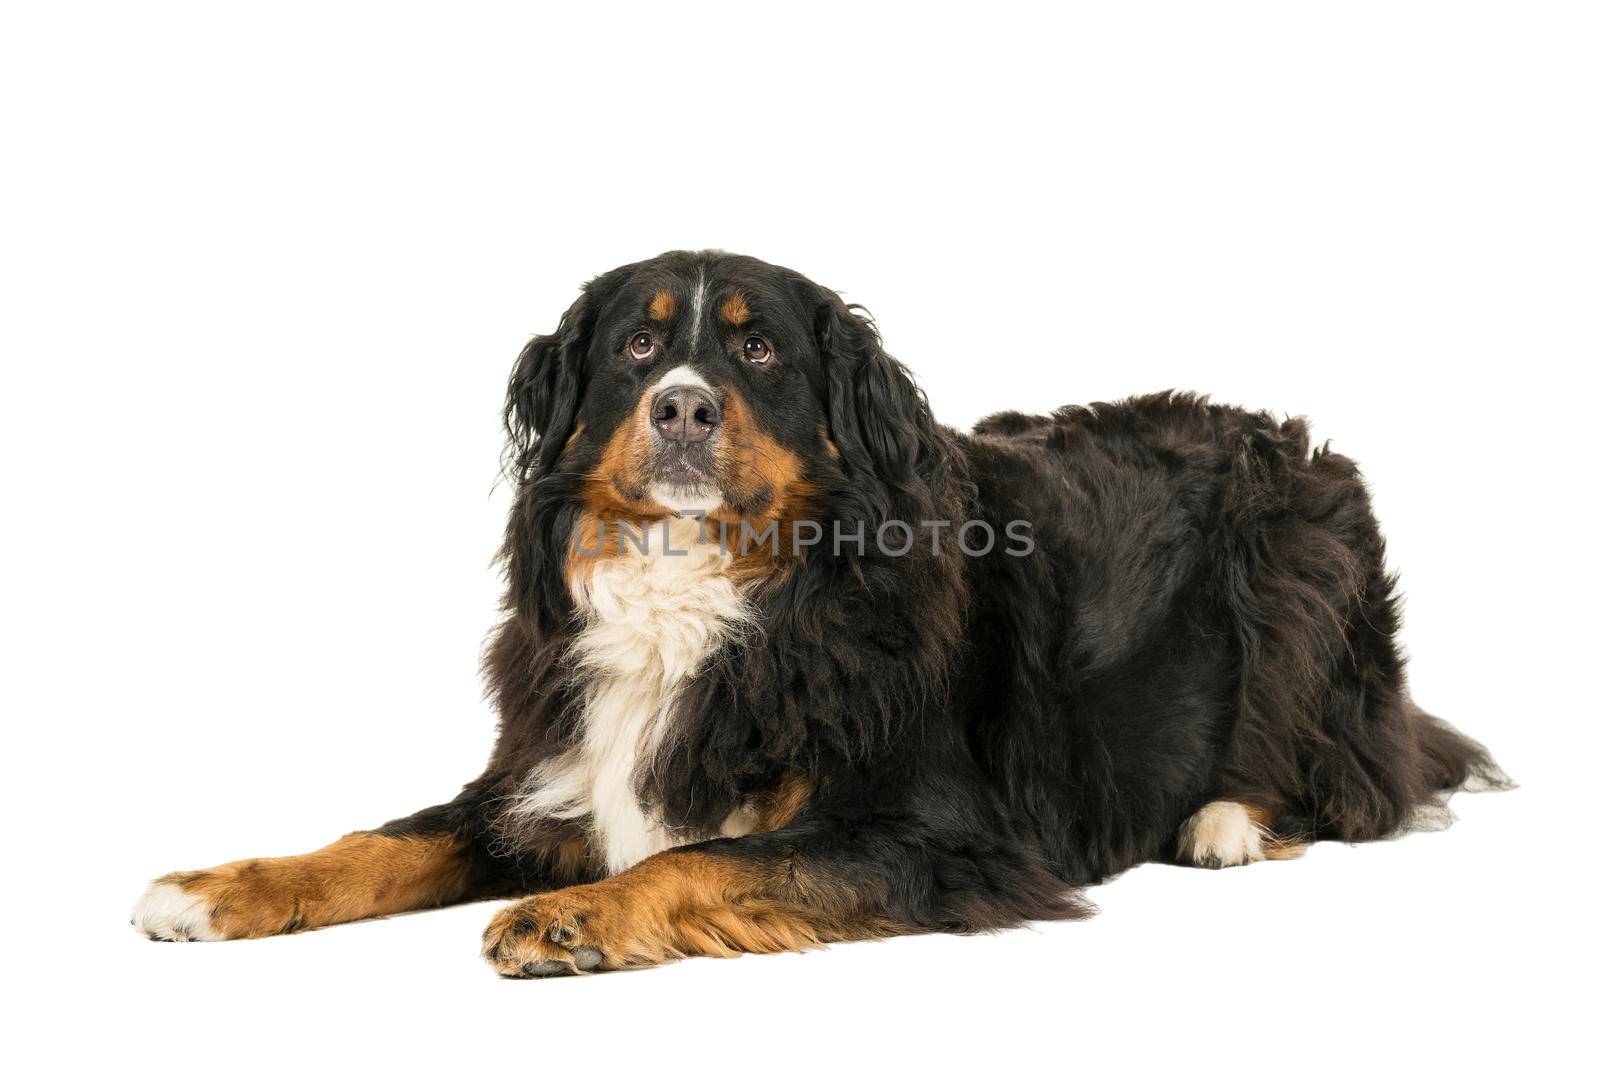 A Berner Sennen Mountain dog lying looking up isolated on a white background